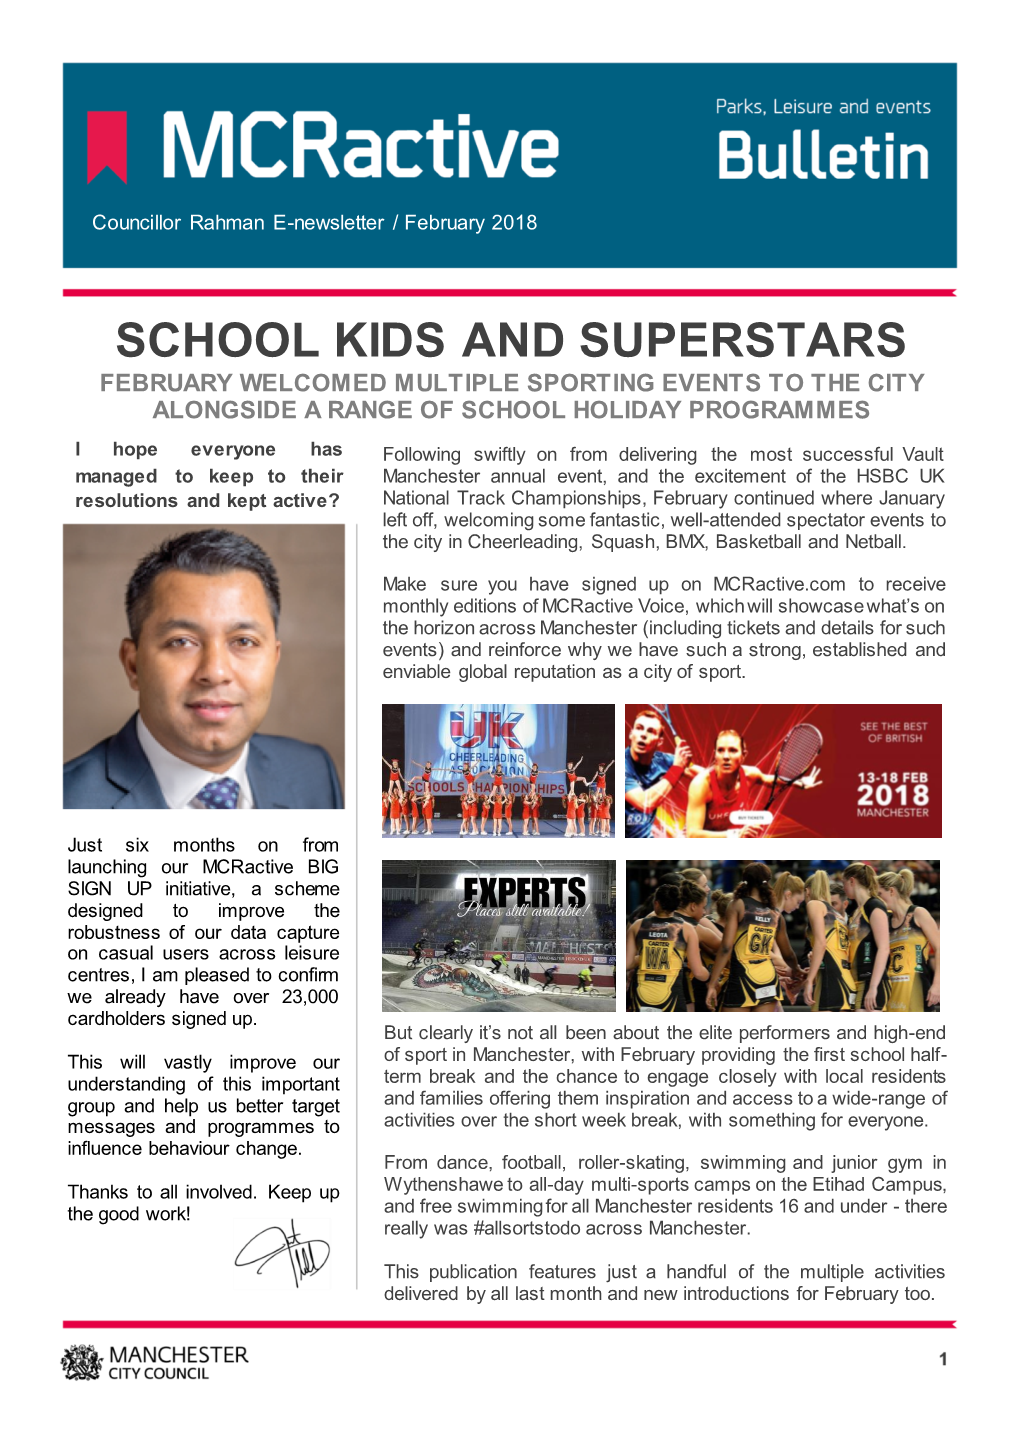 School Kids and Superstars February Welcomed Multiple Sporting Events to the City Alongside a Range of School Holiday Programmes